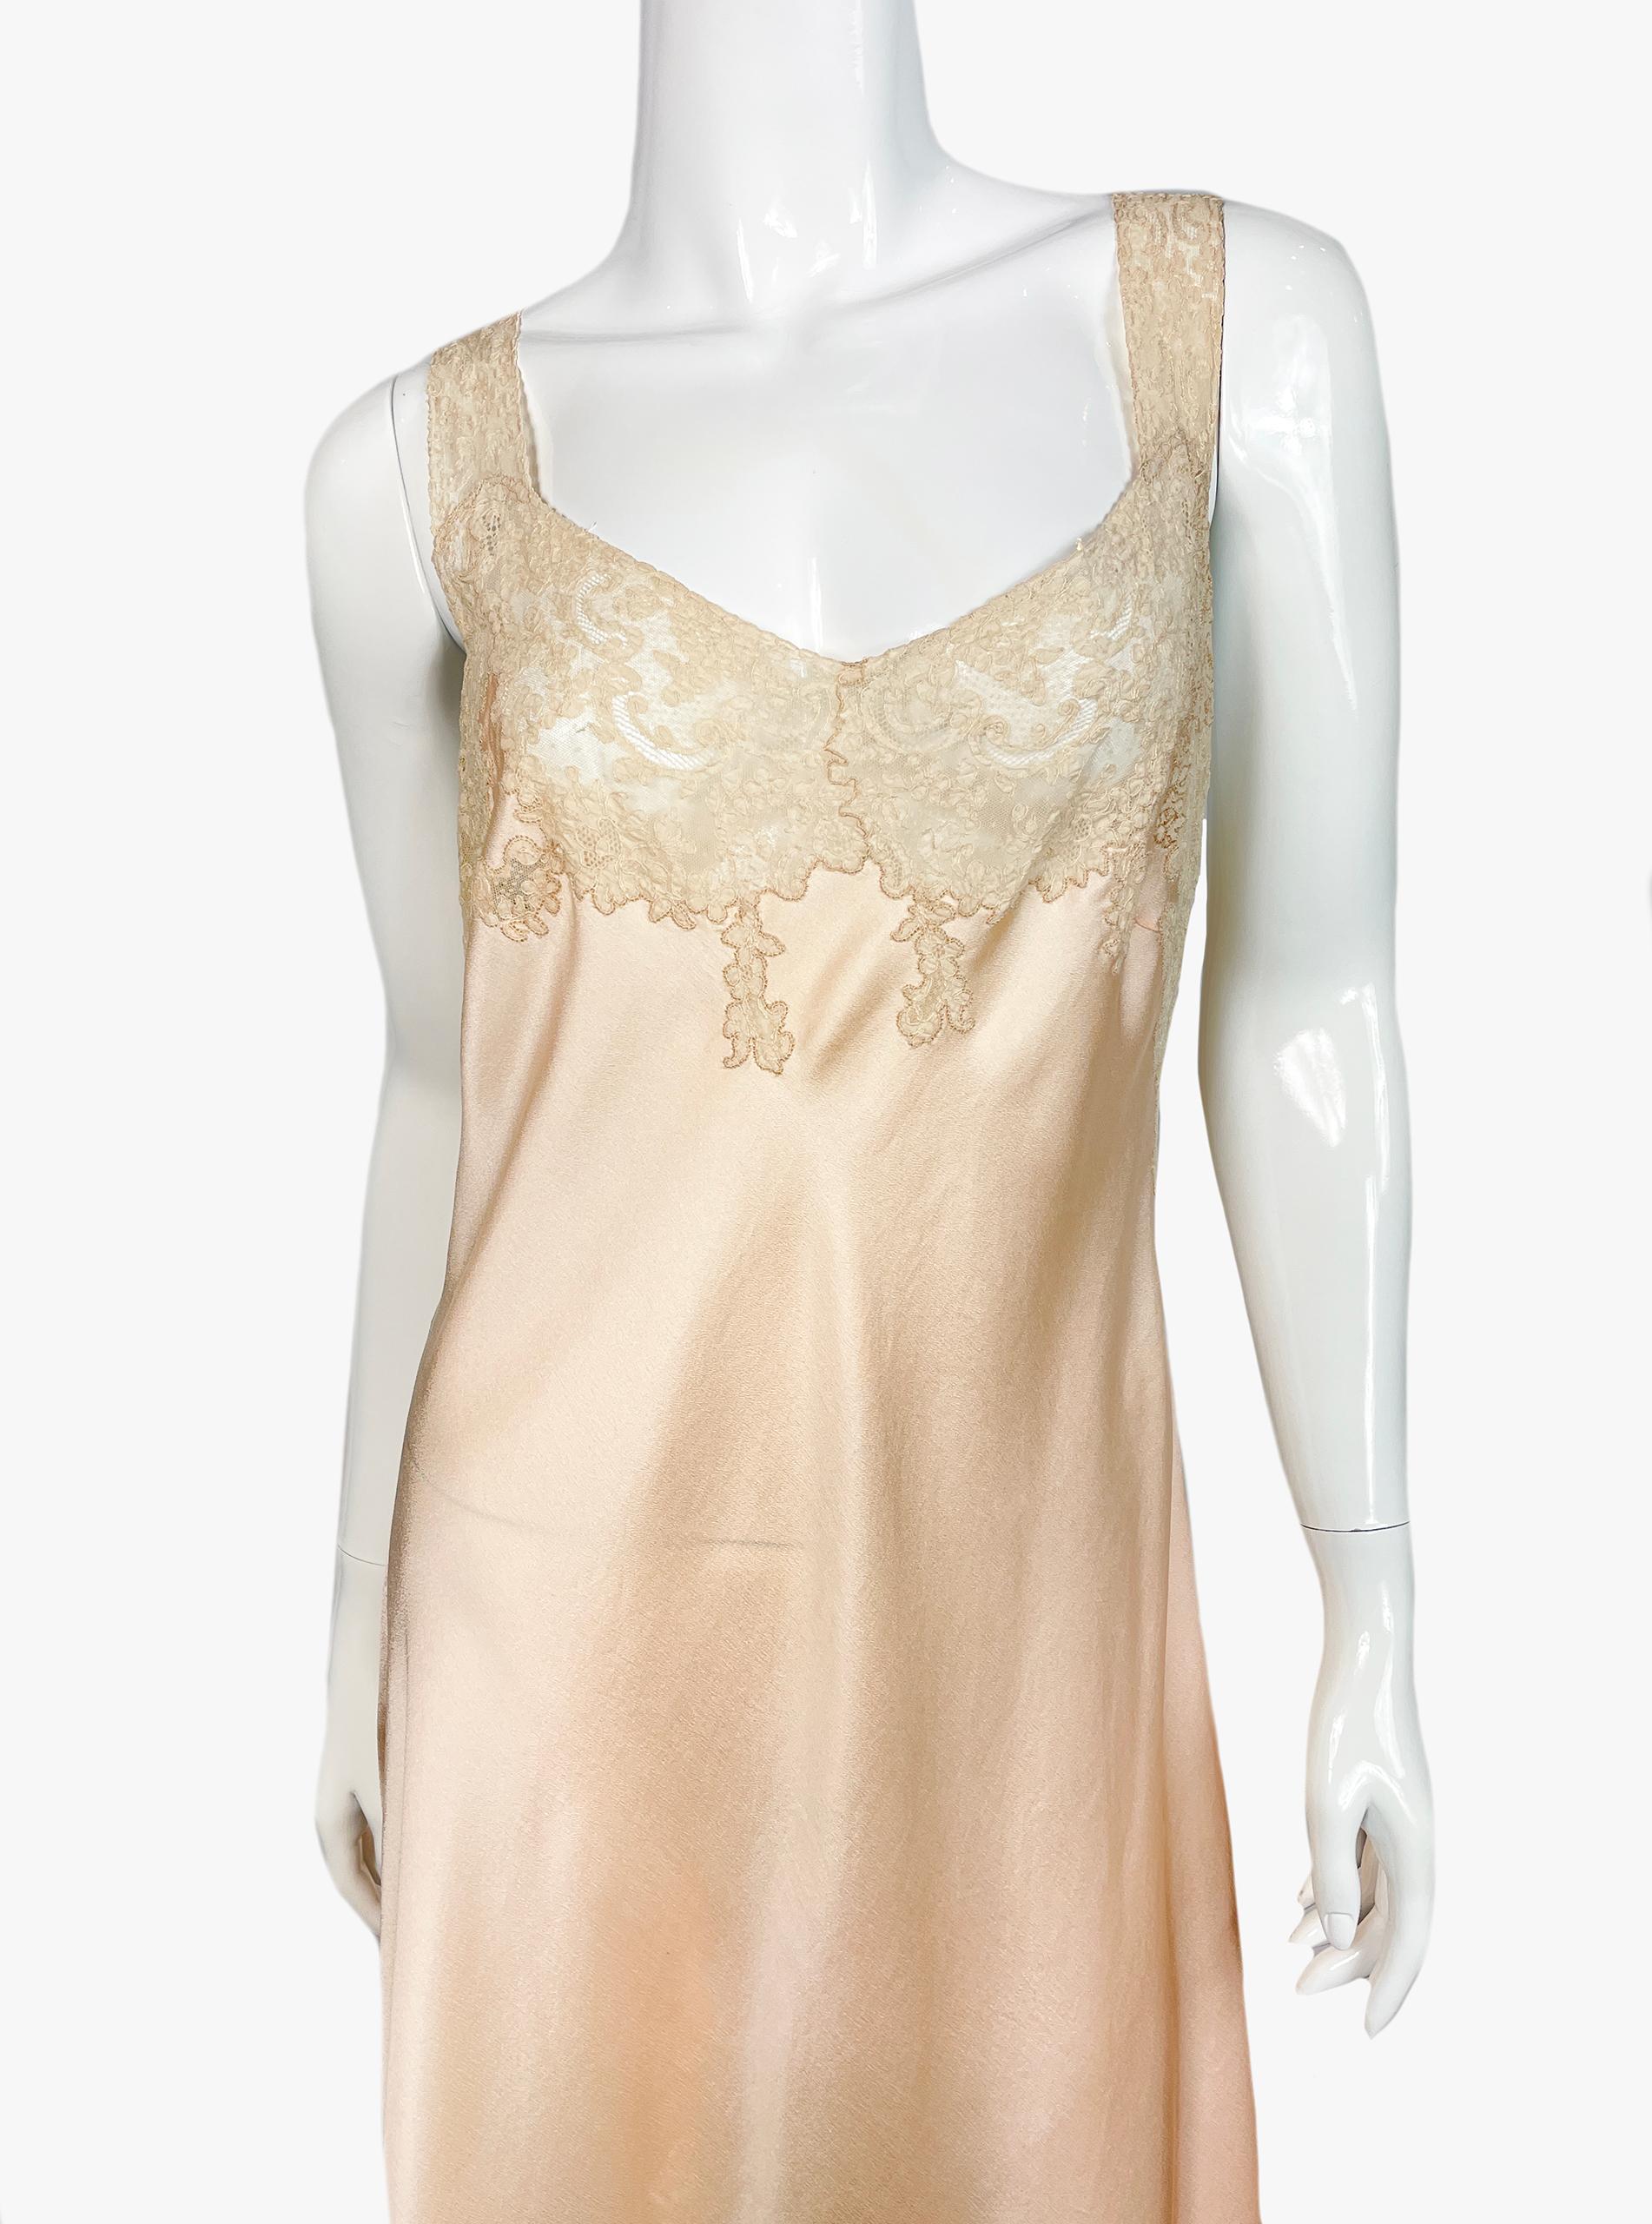 Vintage Silk Sleep Dress, 1930s In Good Condition For Sale In New York, NY